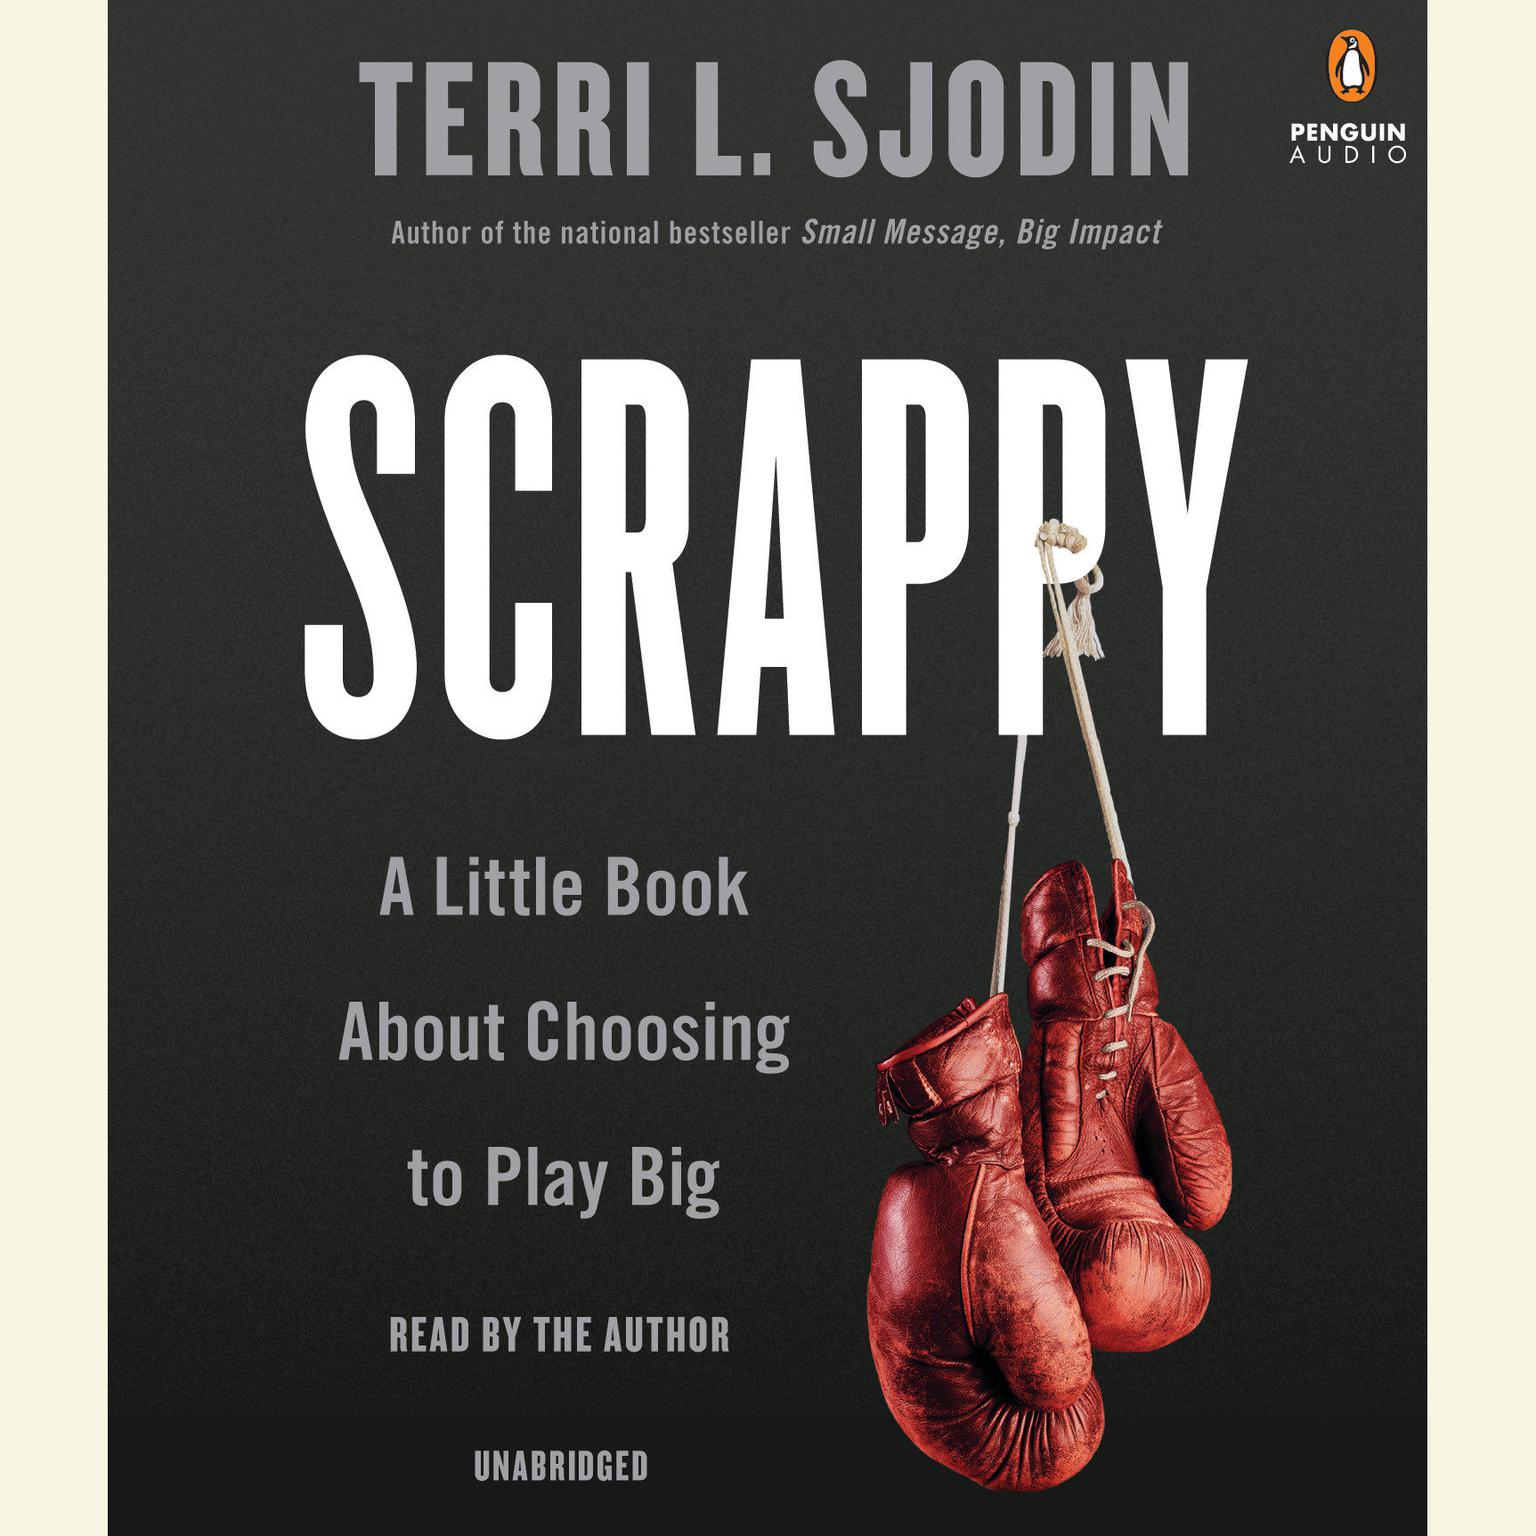 Scrappy: A Little Book About Choosing to Play Big Audiobook, by Terri L. Sjodin